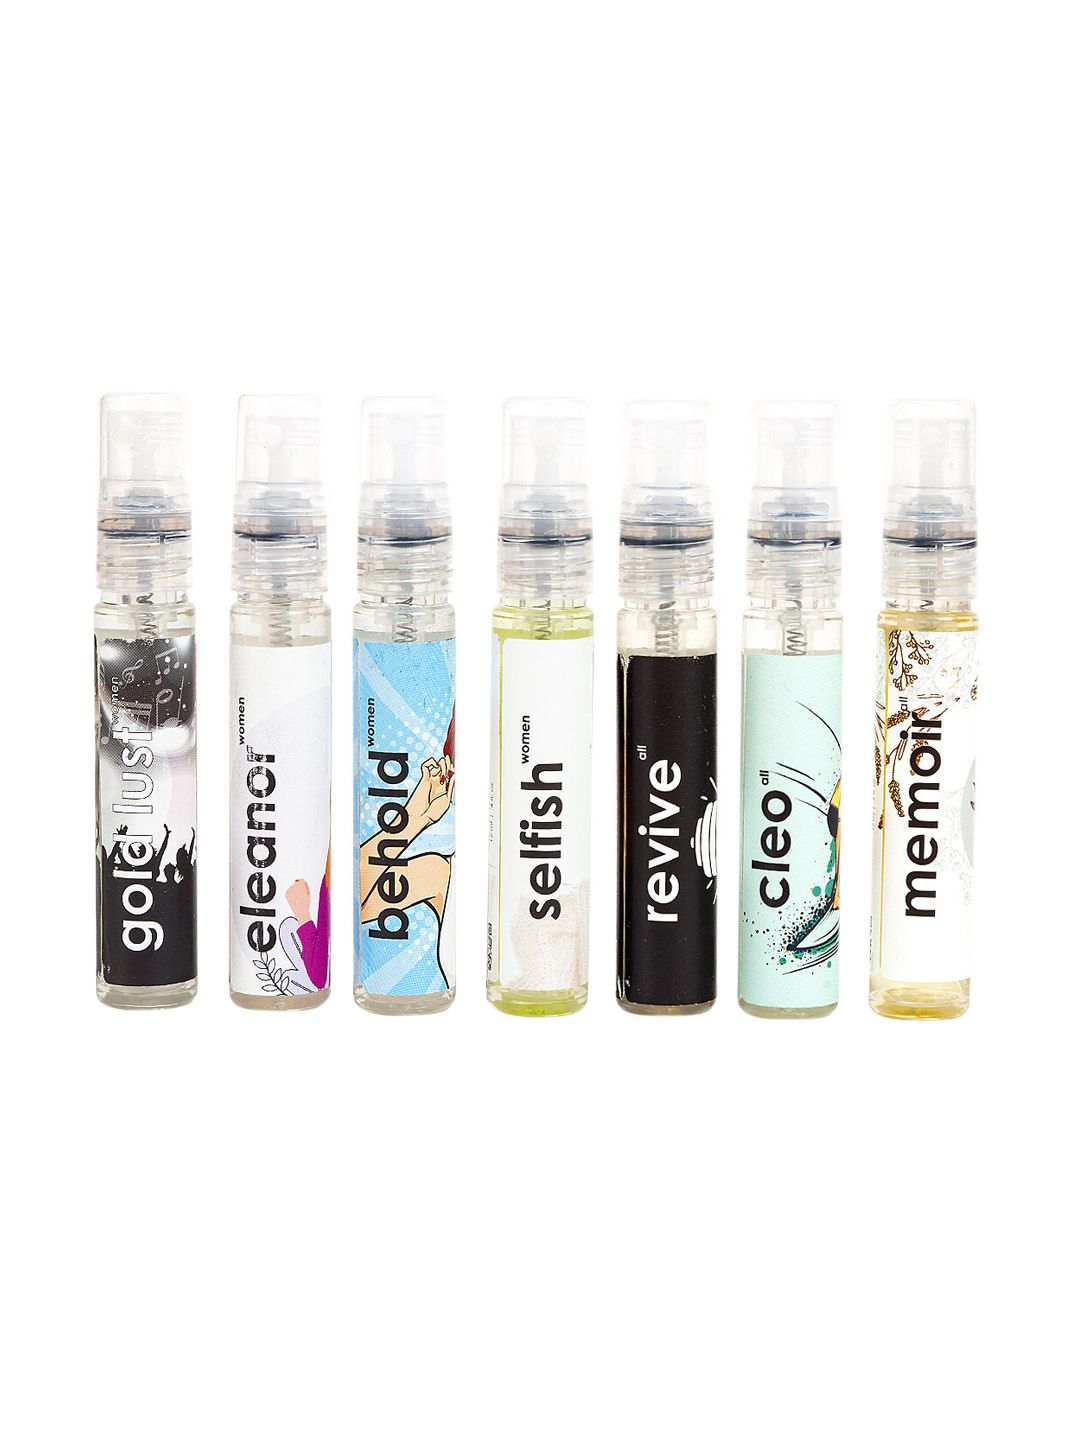 Adiveda Natural Women Perfume Tester Set of 7 - 12ml Each Price in India